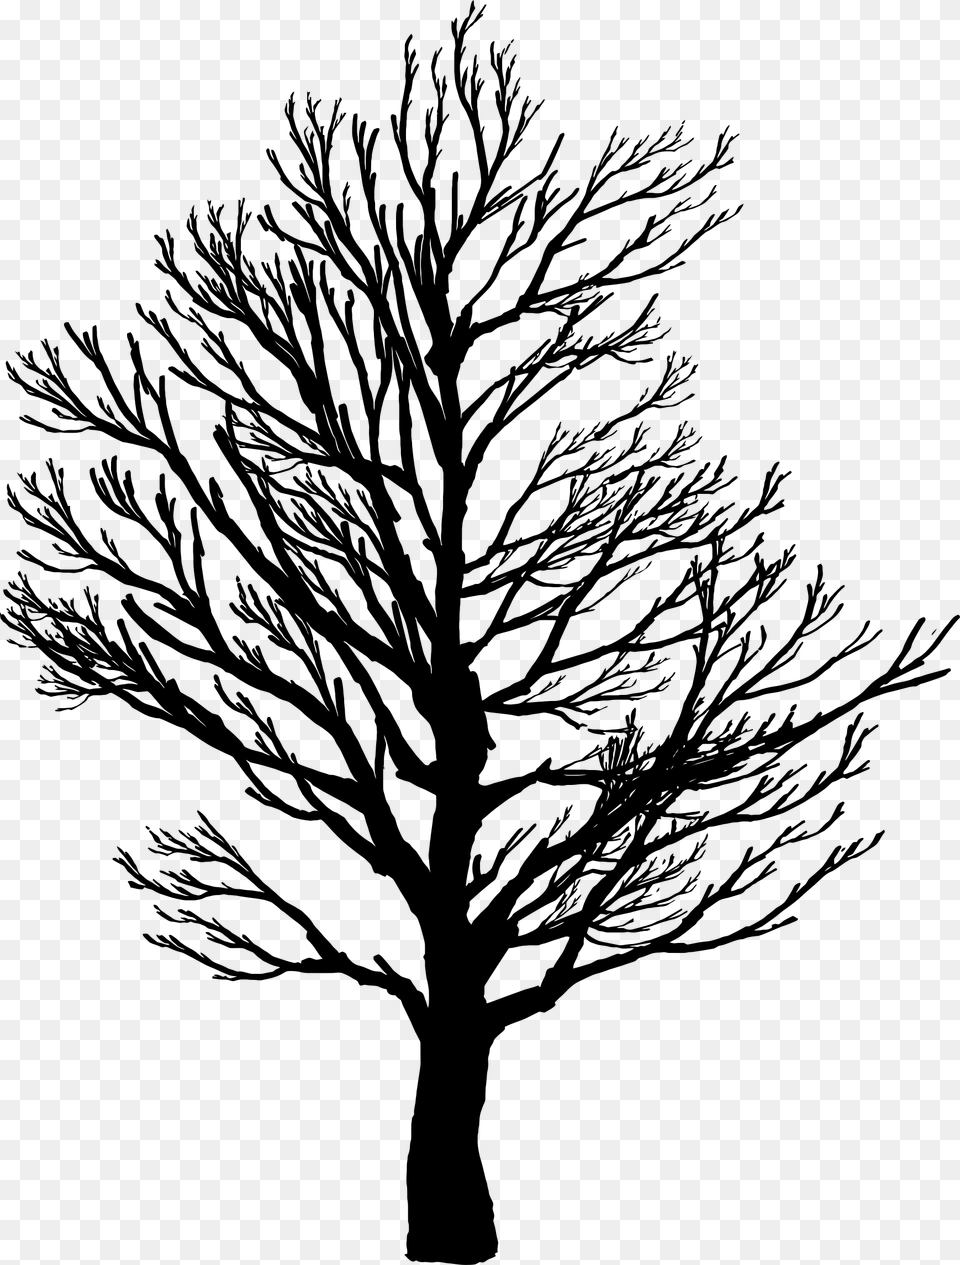 Barren Tree Silhouette Icons, Gray Free Transparent Png